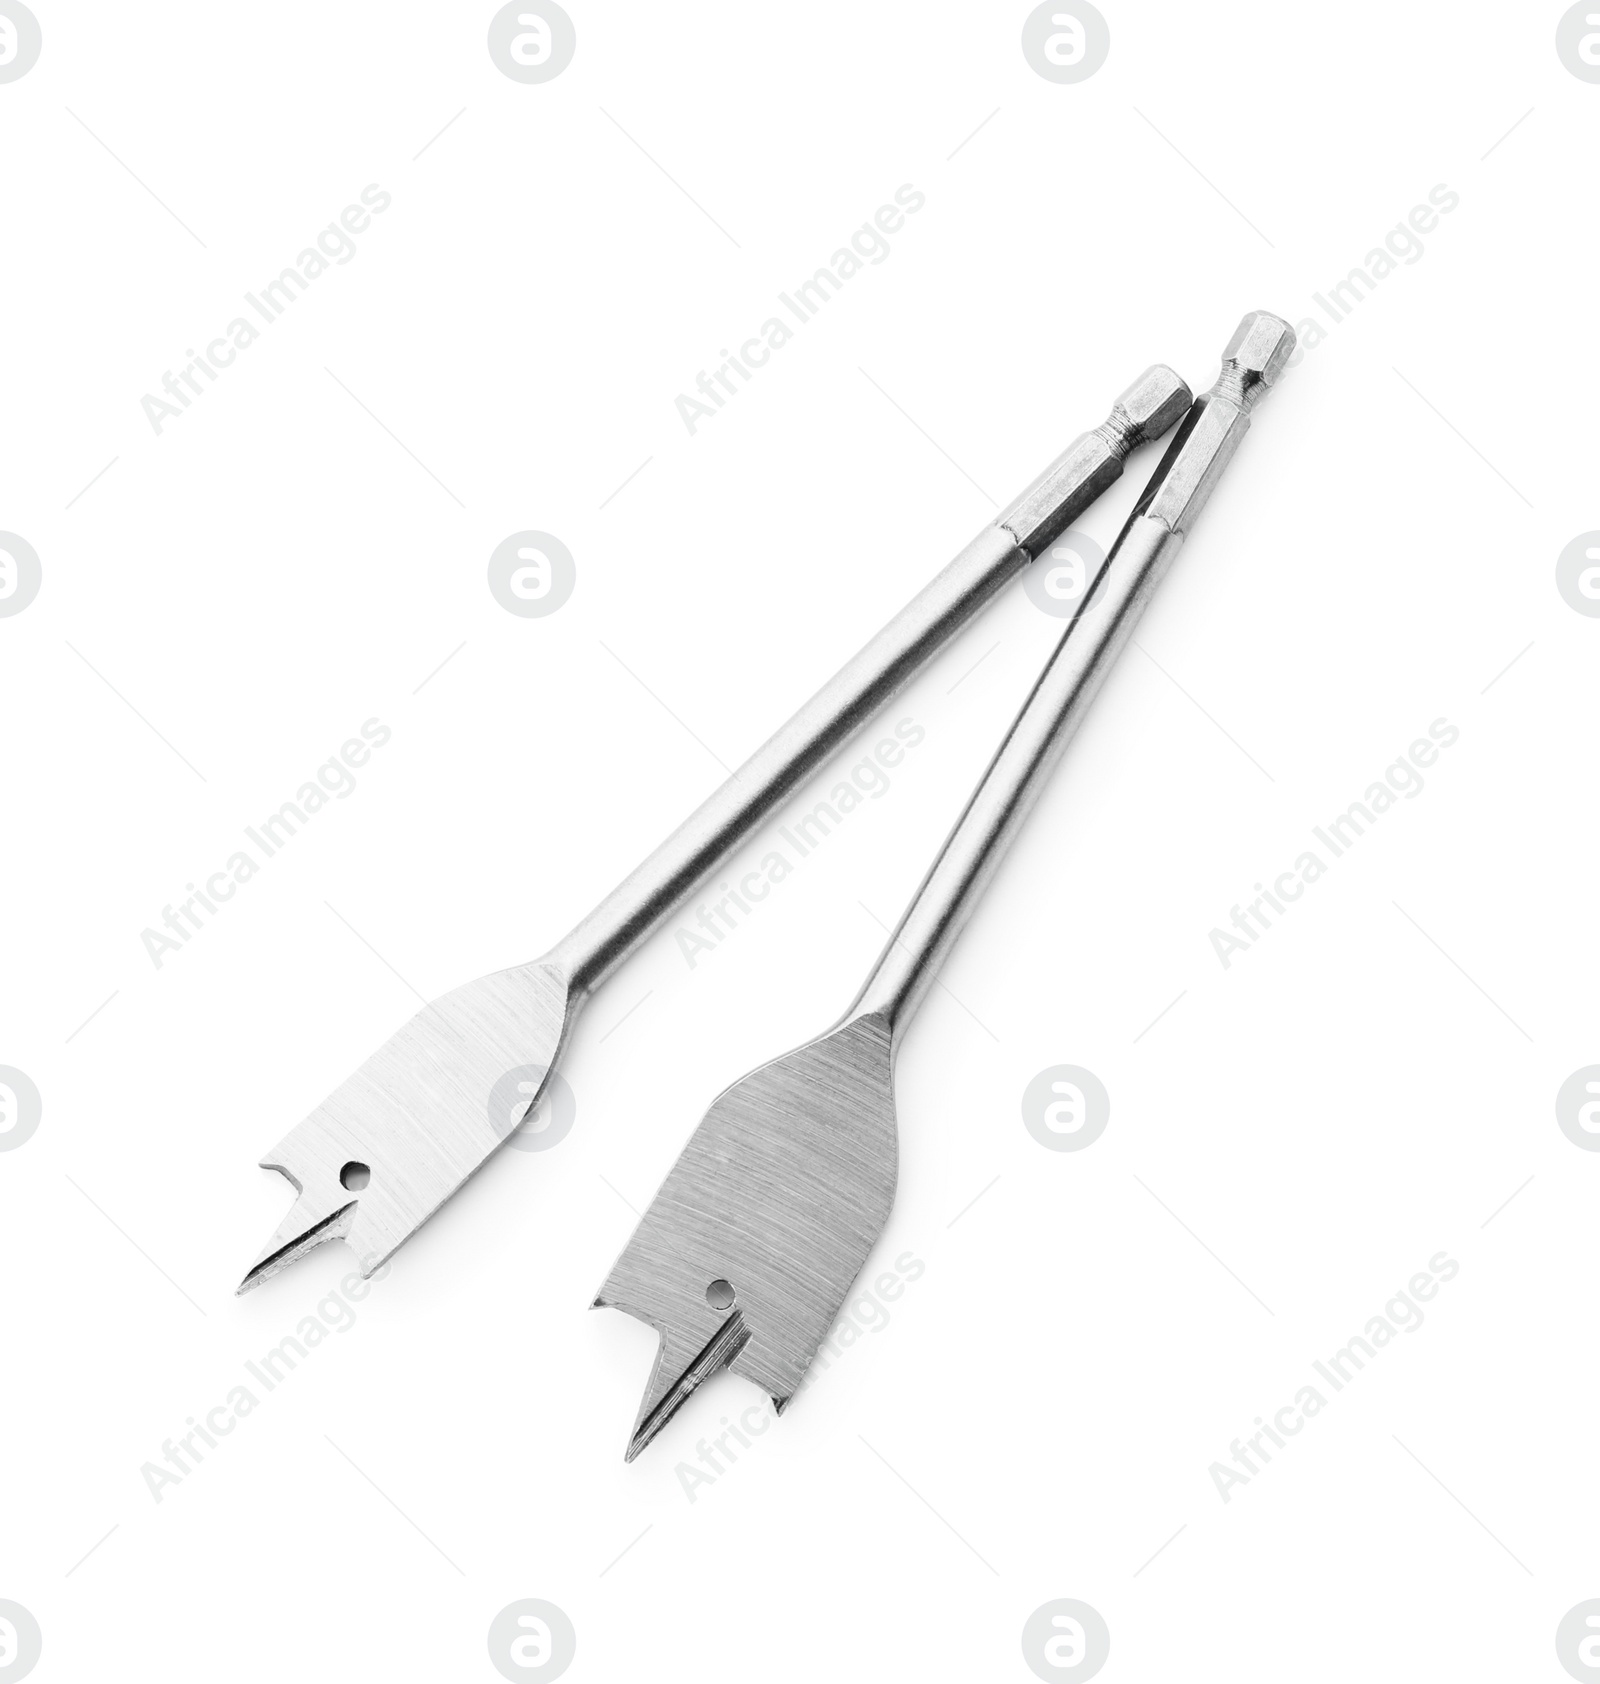 Photo of Spade drill bits isolated on white, top view. Carpenter's tools